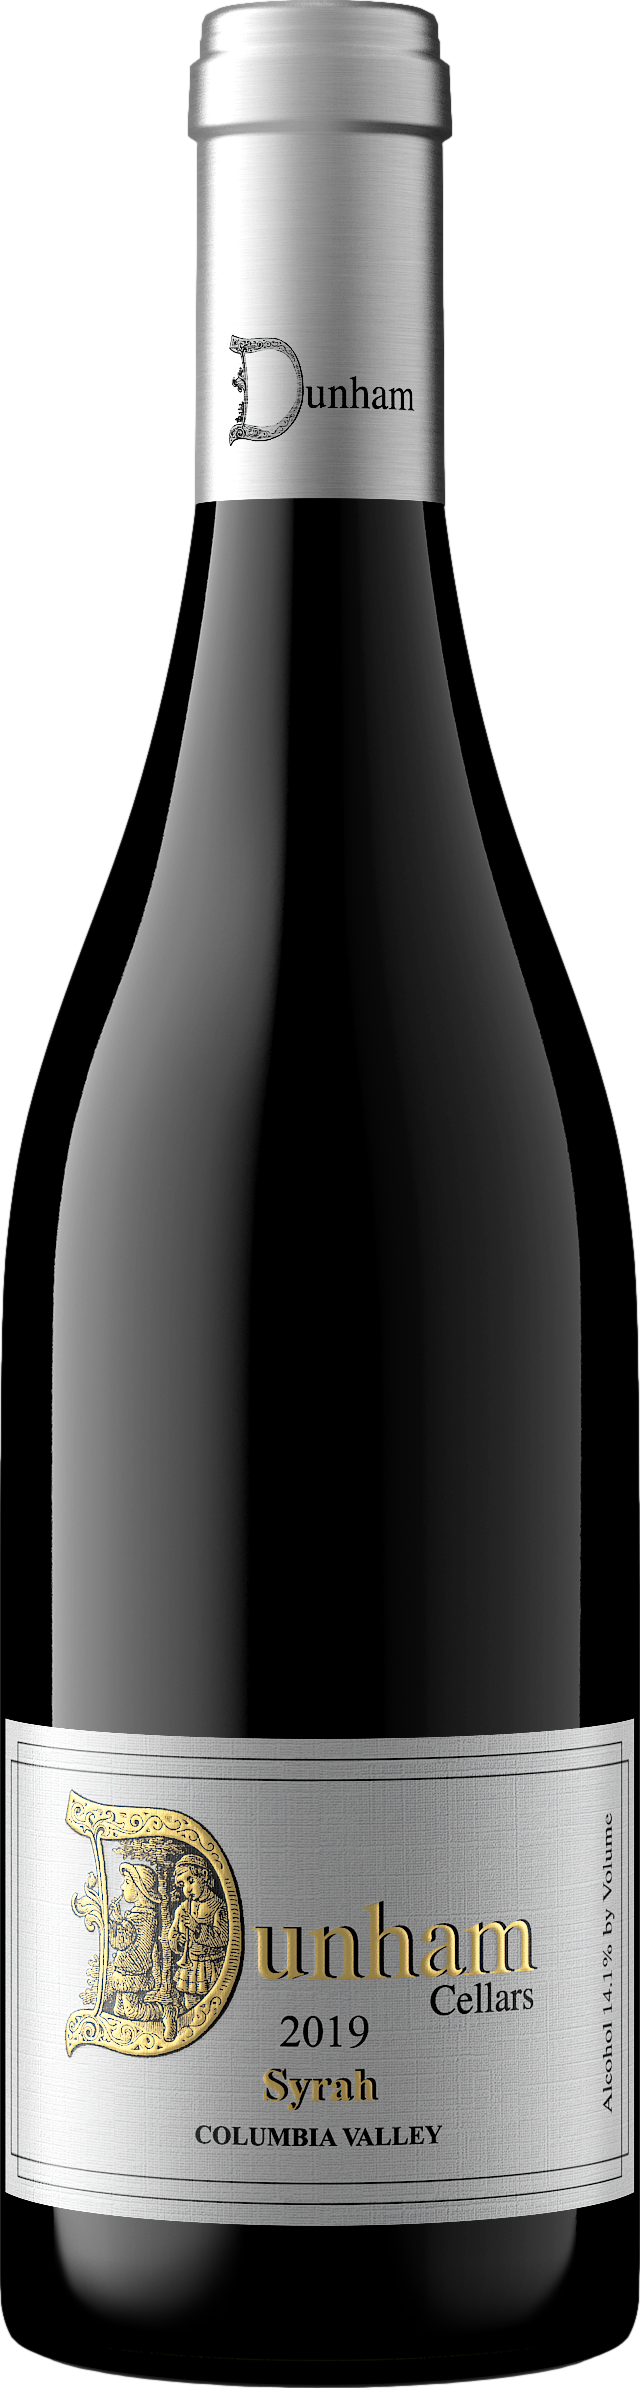 Product image of Dunham Cellars Syrah 2019 from 8wines